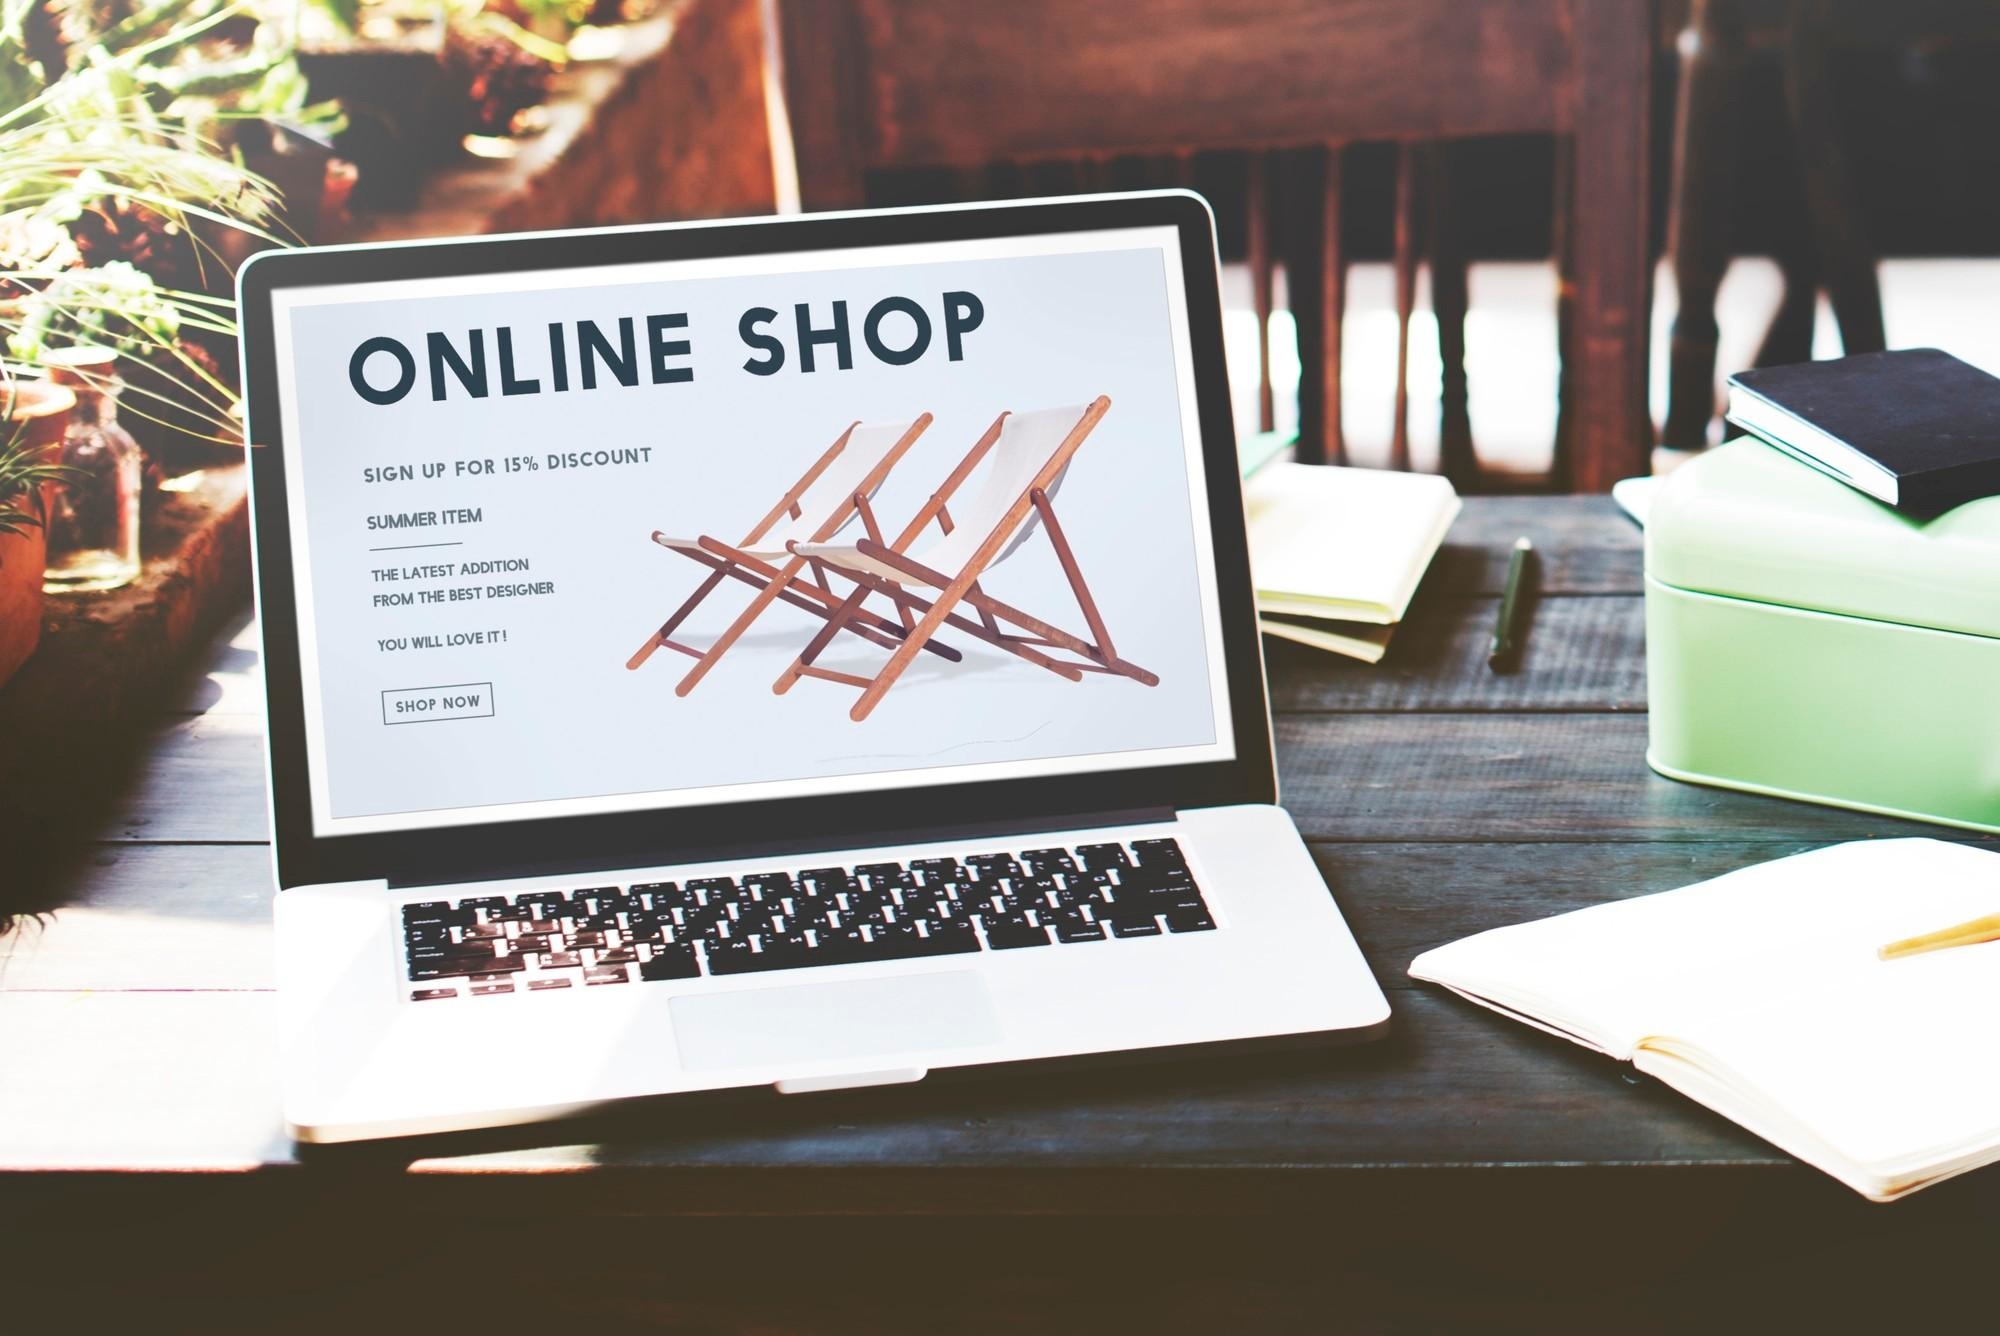 Top 5 things to keep in mind when approaching an eCommerce website redesign or planning an eCommerce feature.